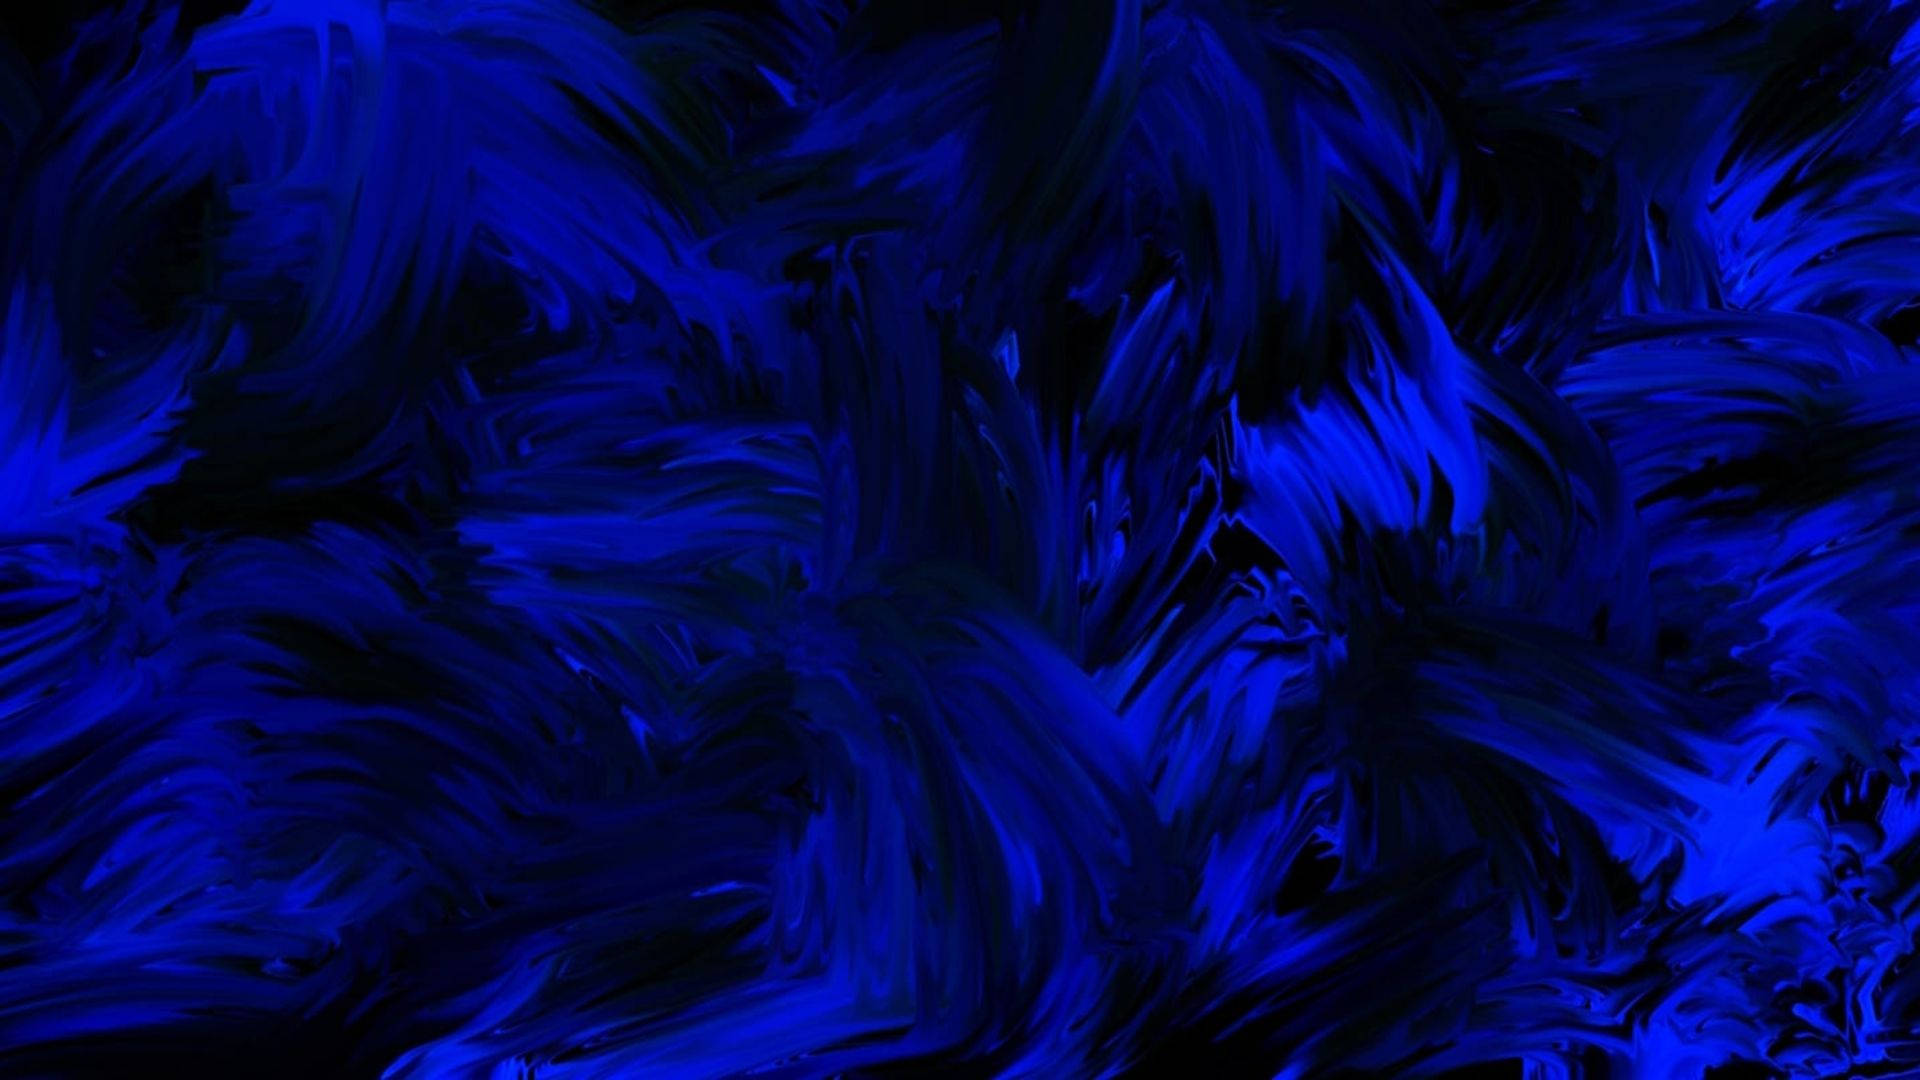 Painted Neon Blue Wallpaper